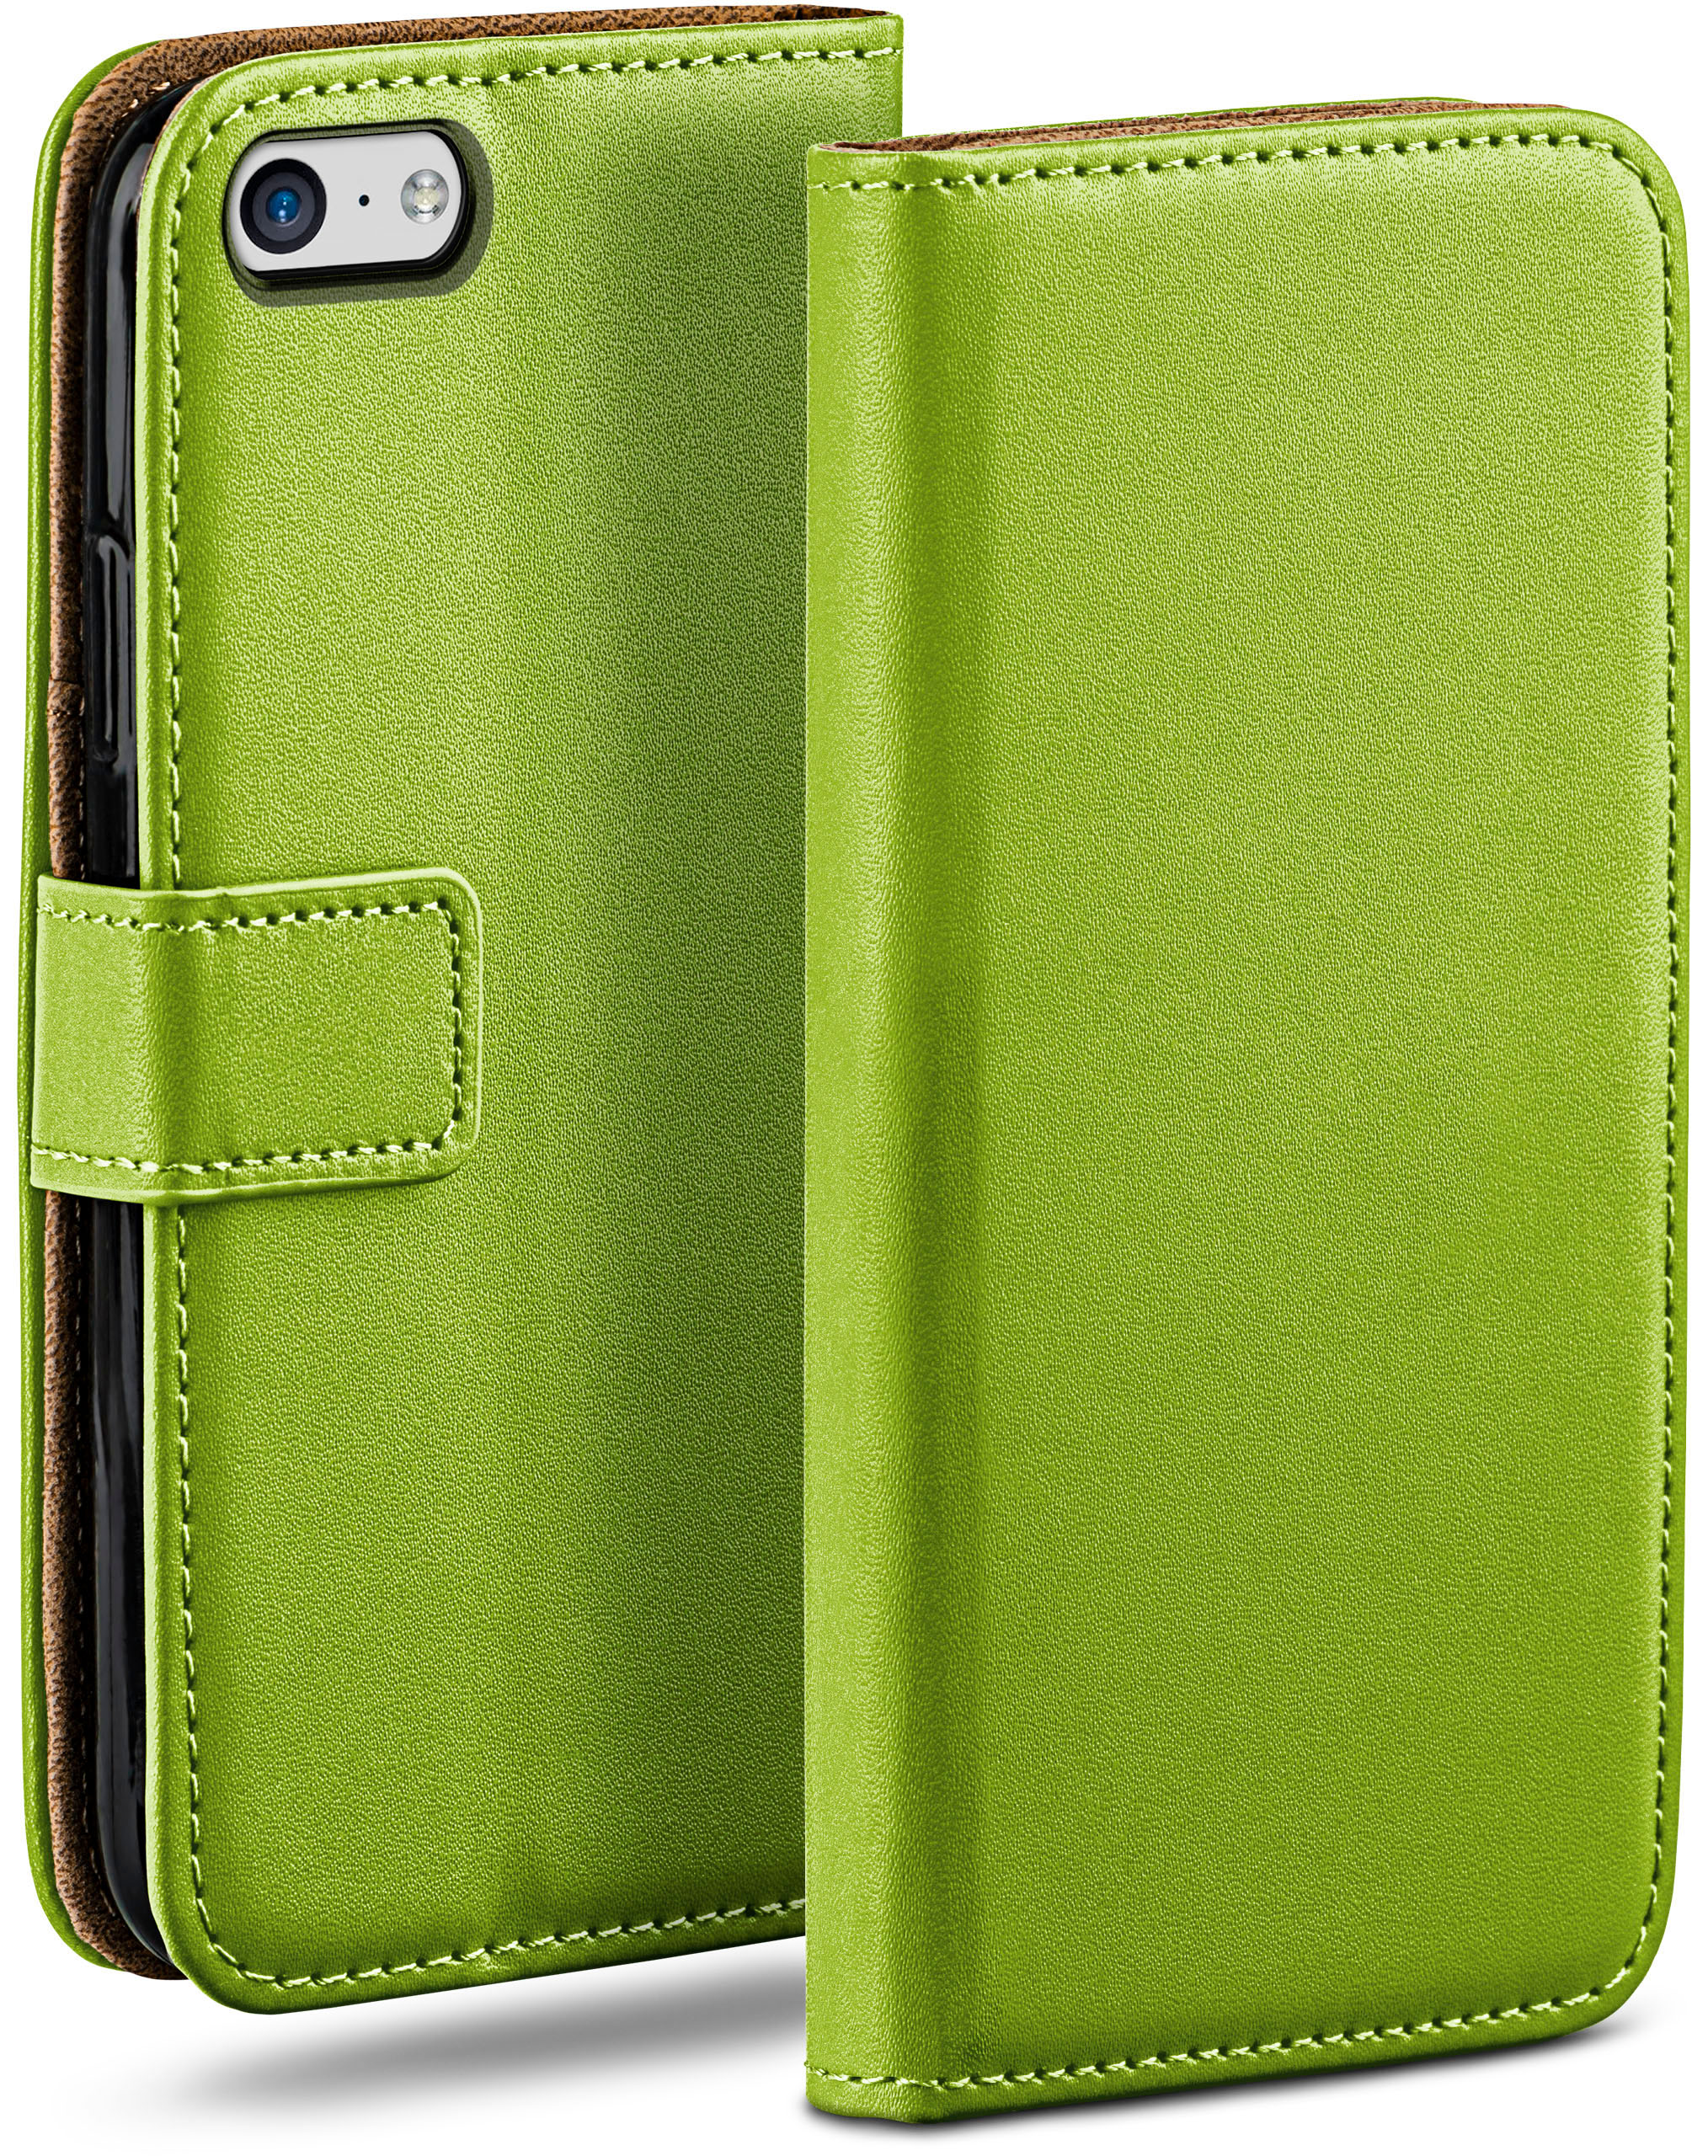 MOEX 5c, Case, Lime-Green Apple, Bookcover, Book iPhone